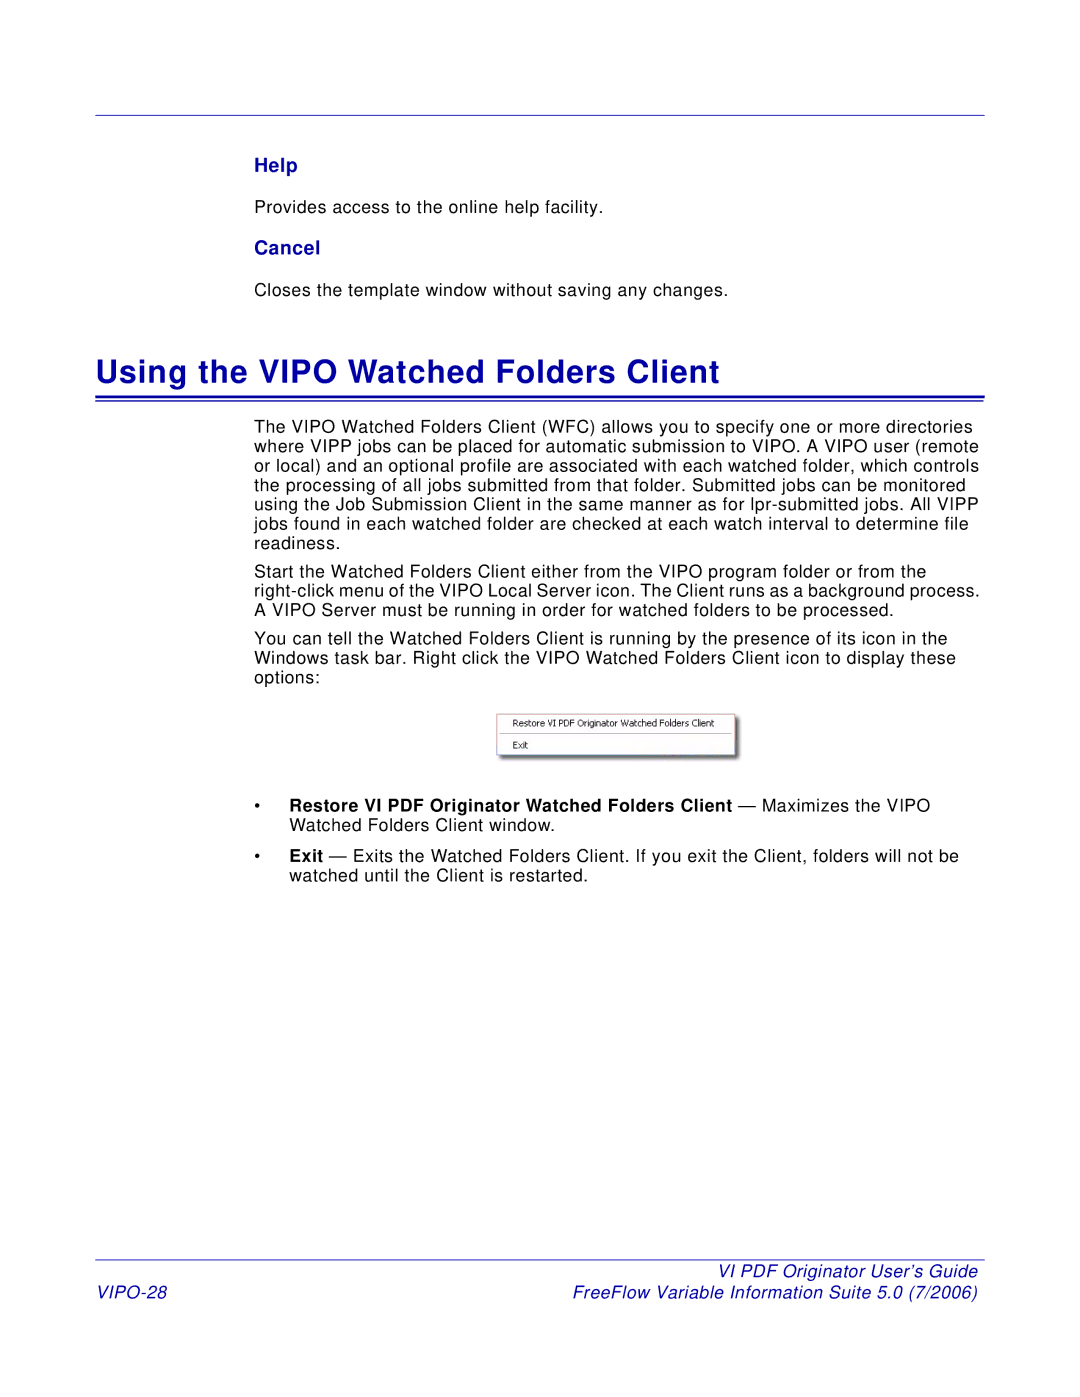 Xerox 5 manual Using the Vipo Watched Folders Client, VIPO-28 